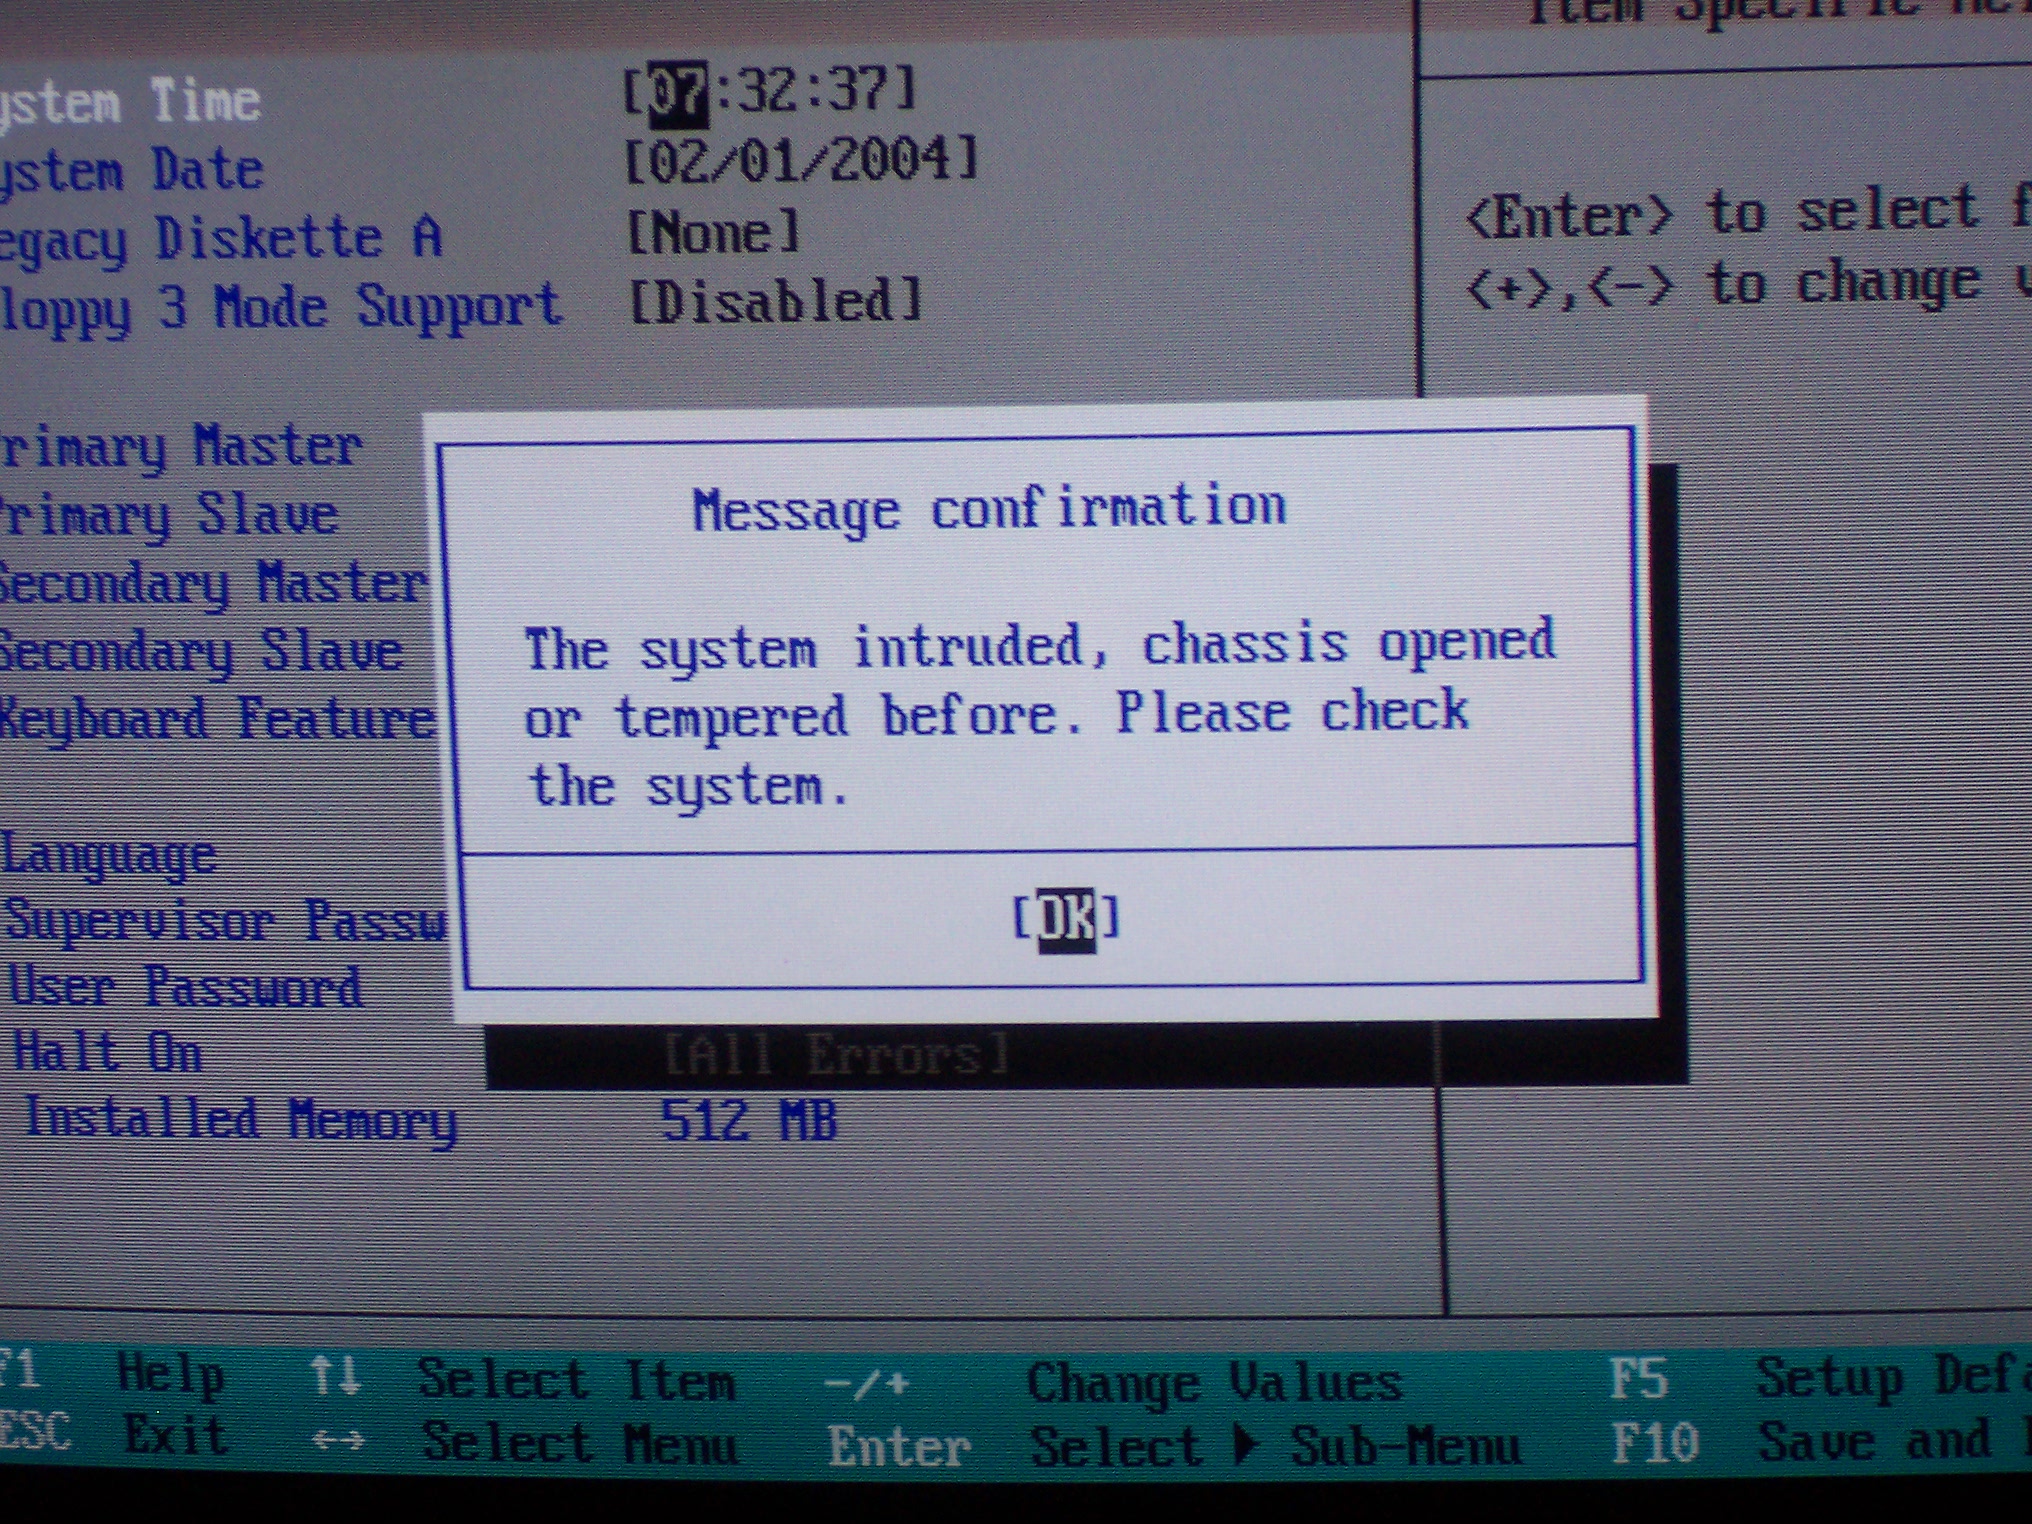 Message confirmation

The system intruded, chassis opened or tempered before. Please check the system.

WHAT CHASSIS????????